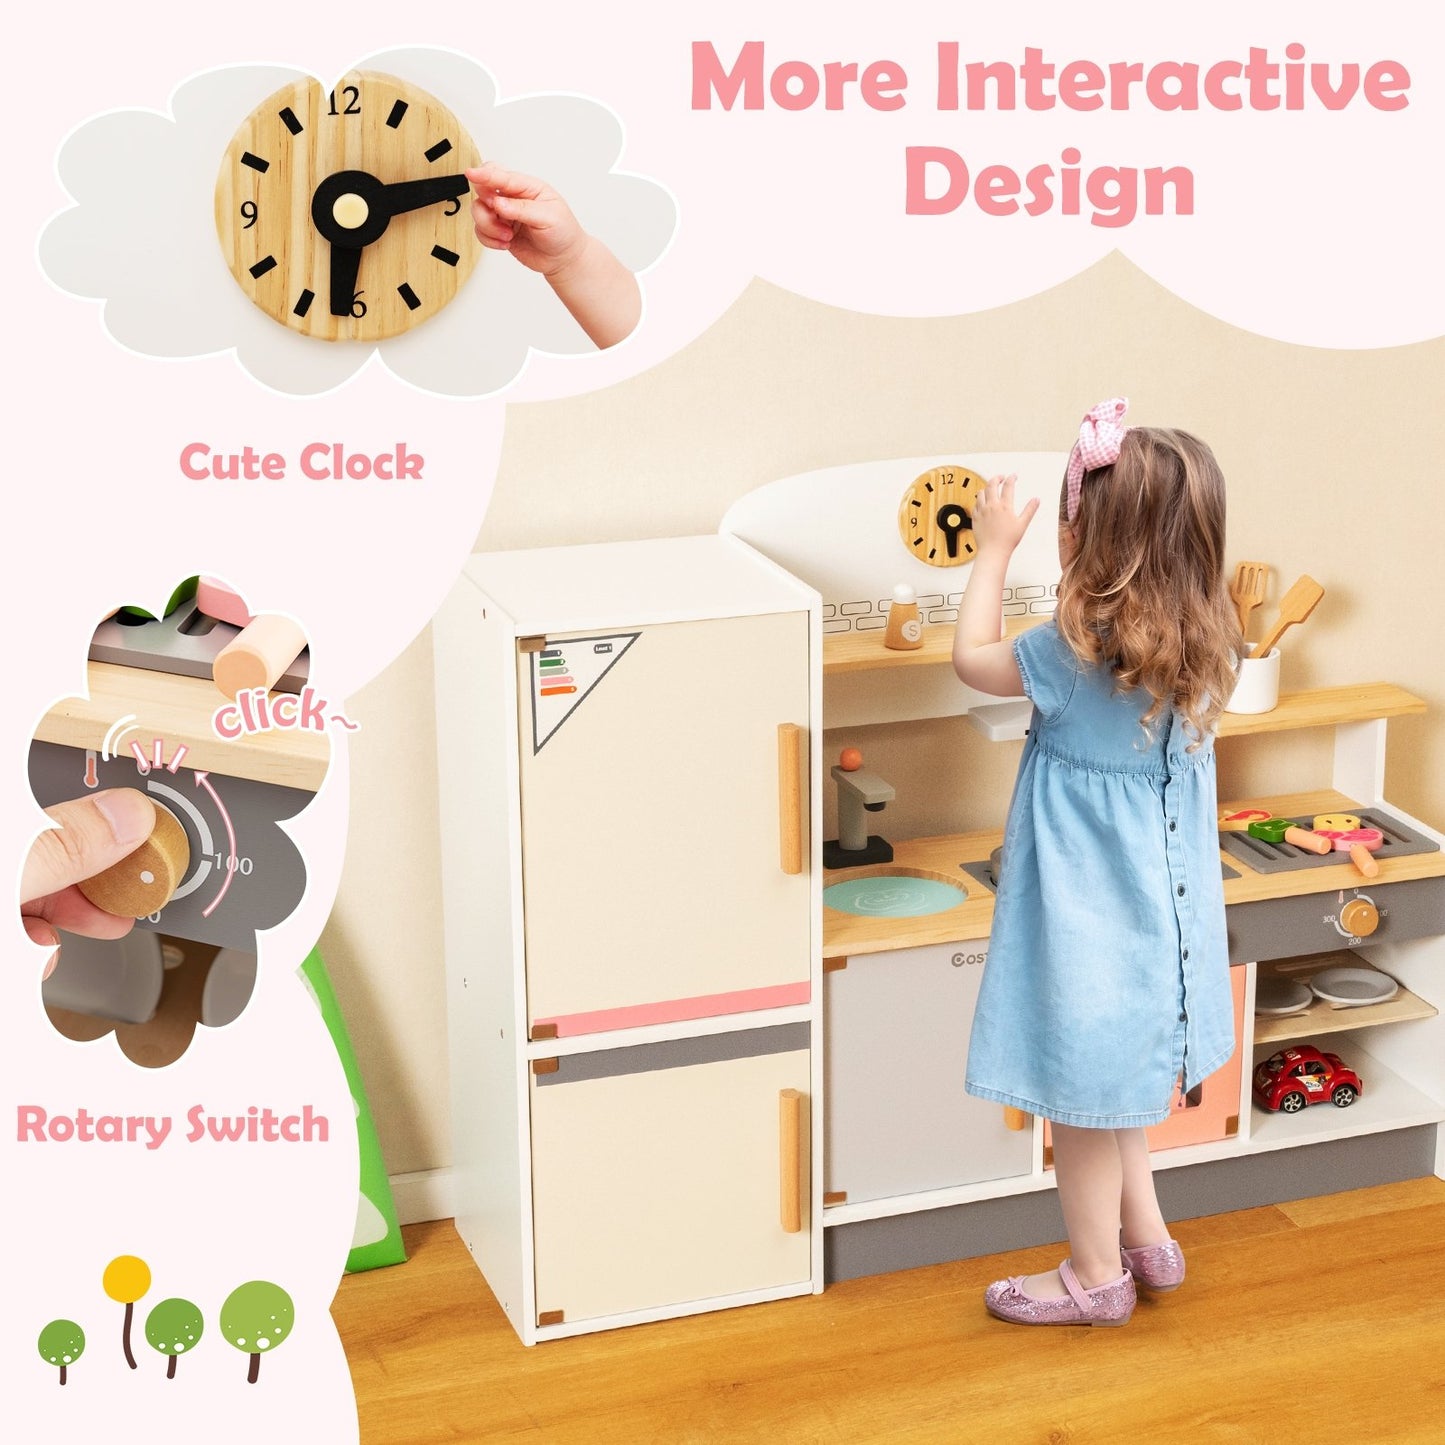 Kids Play Kitchen Set with Realistic Range Hood and Refrigerator